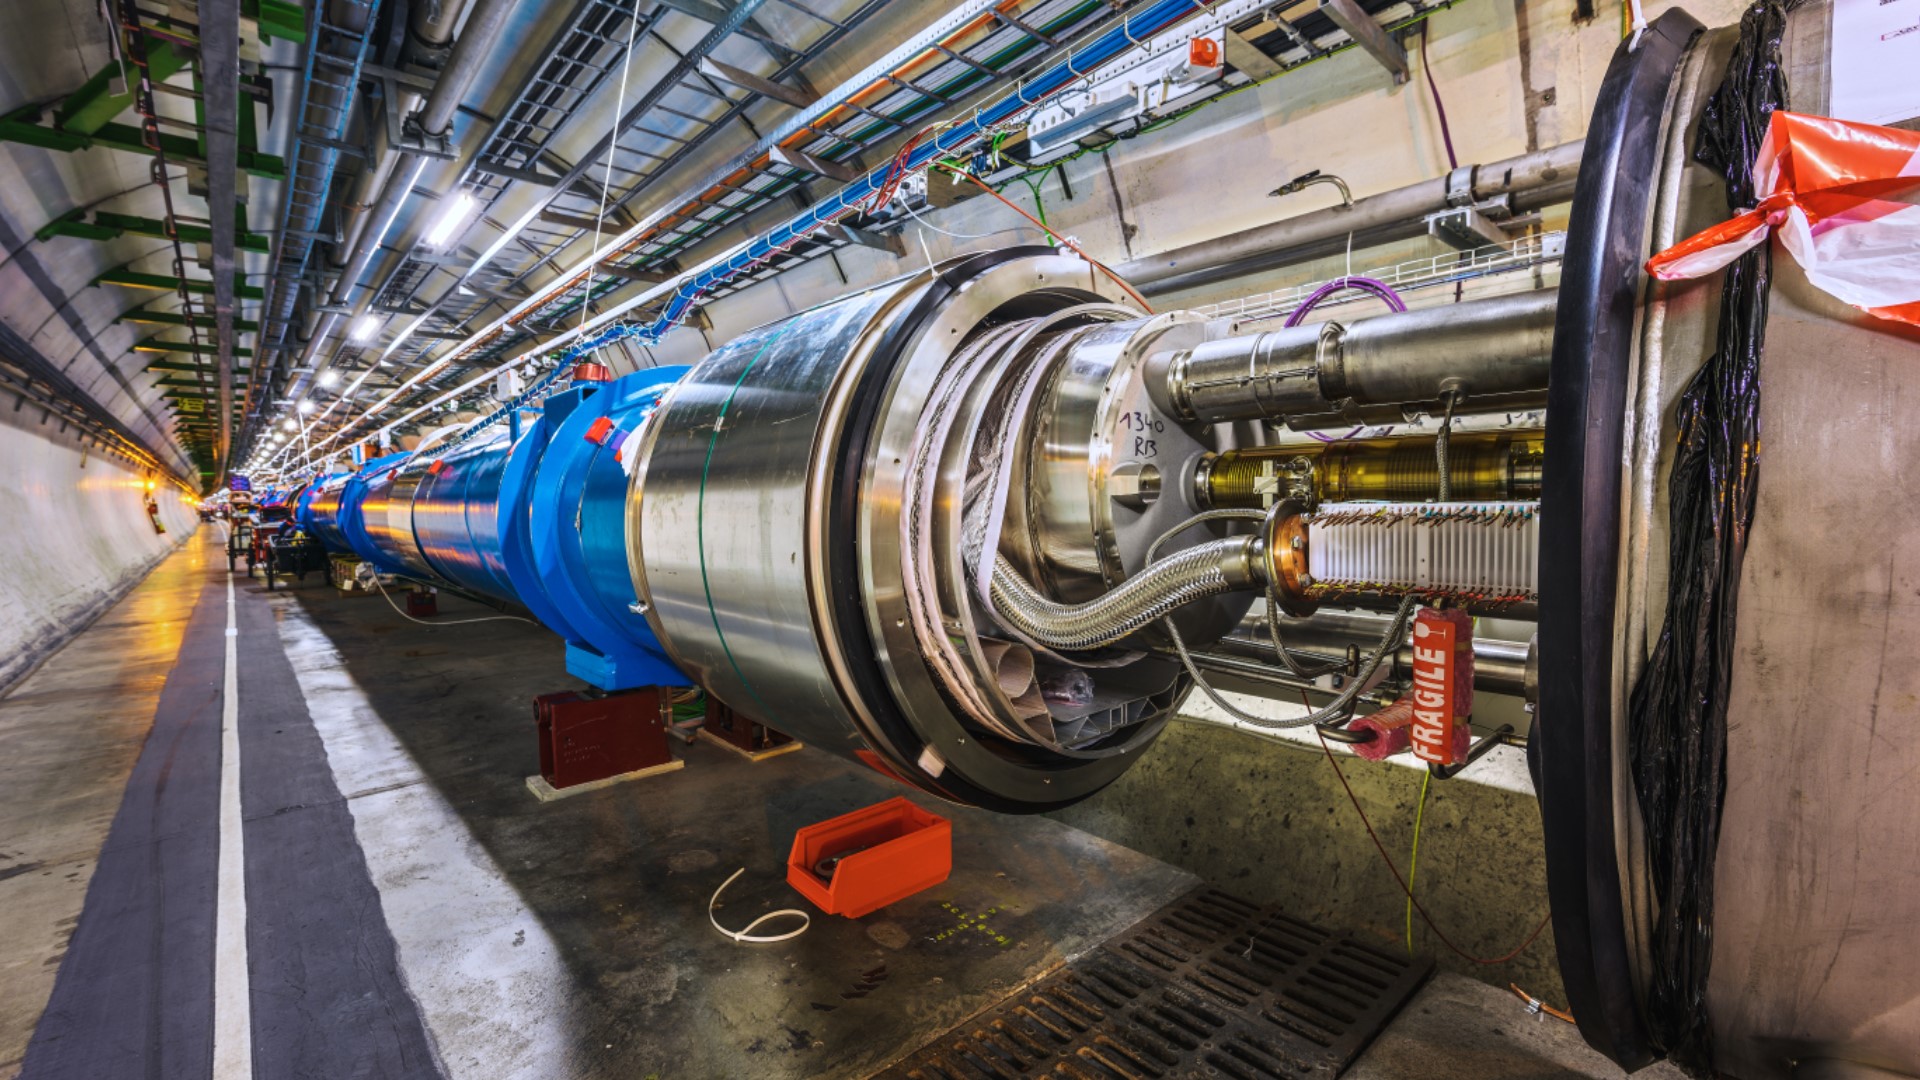 CERN July 5th particle accelerator myths debunked